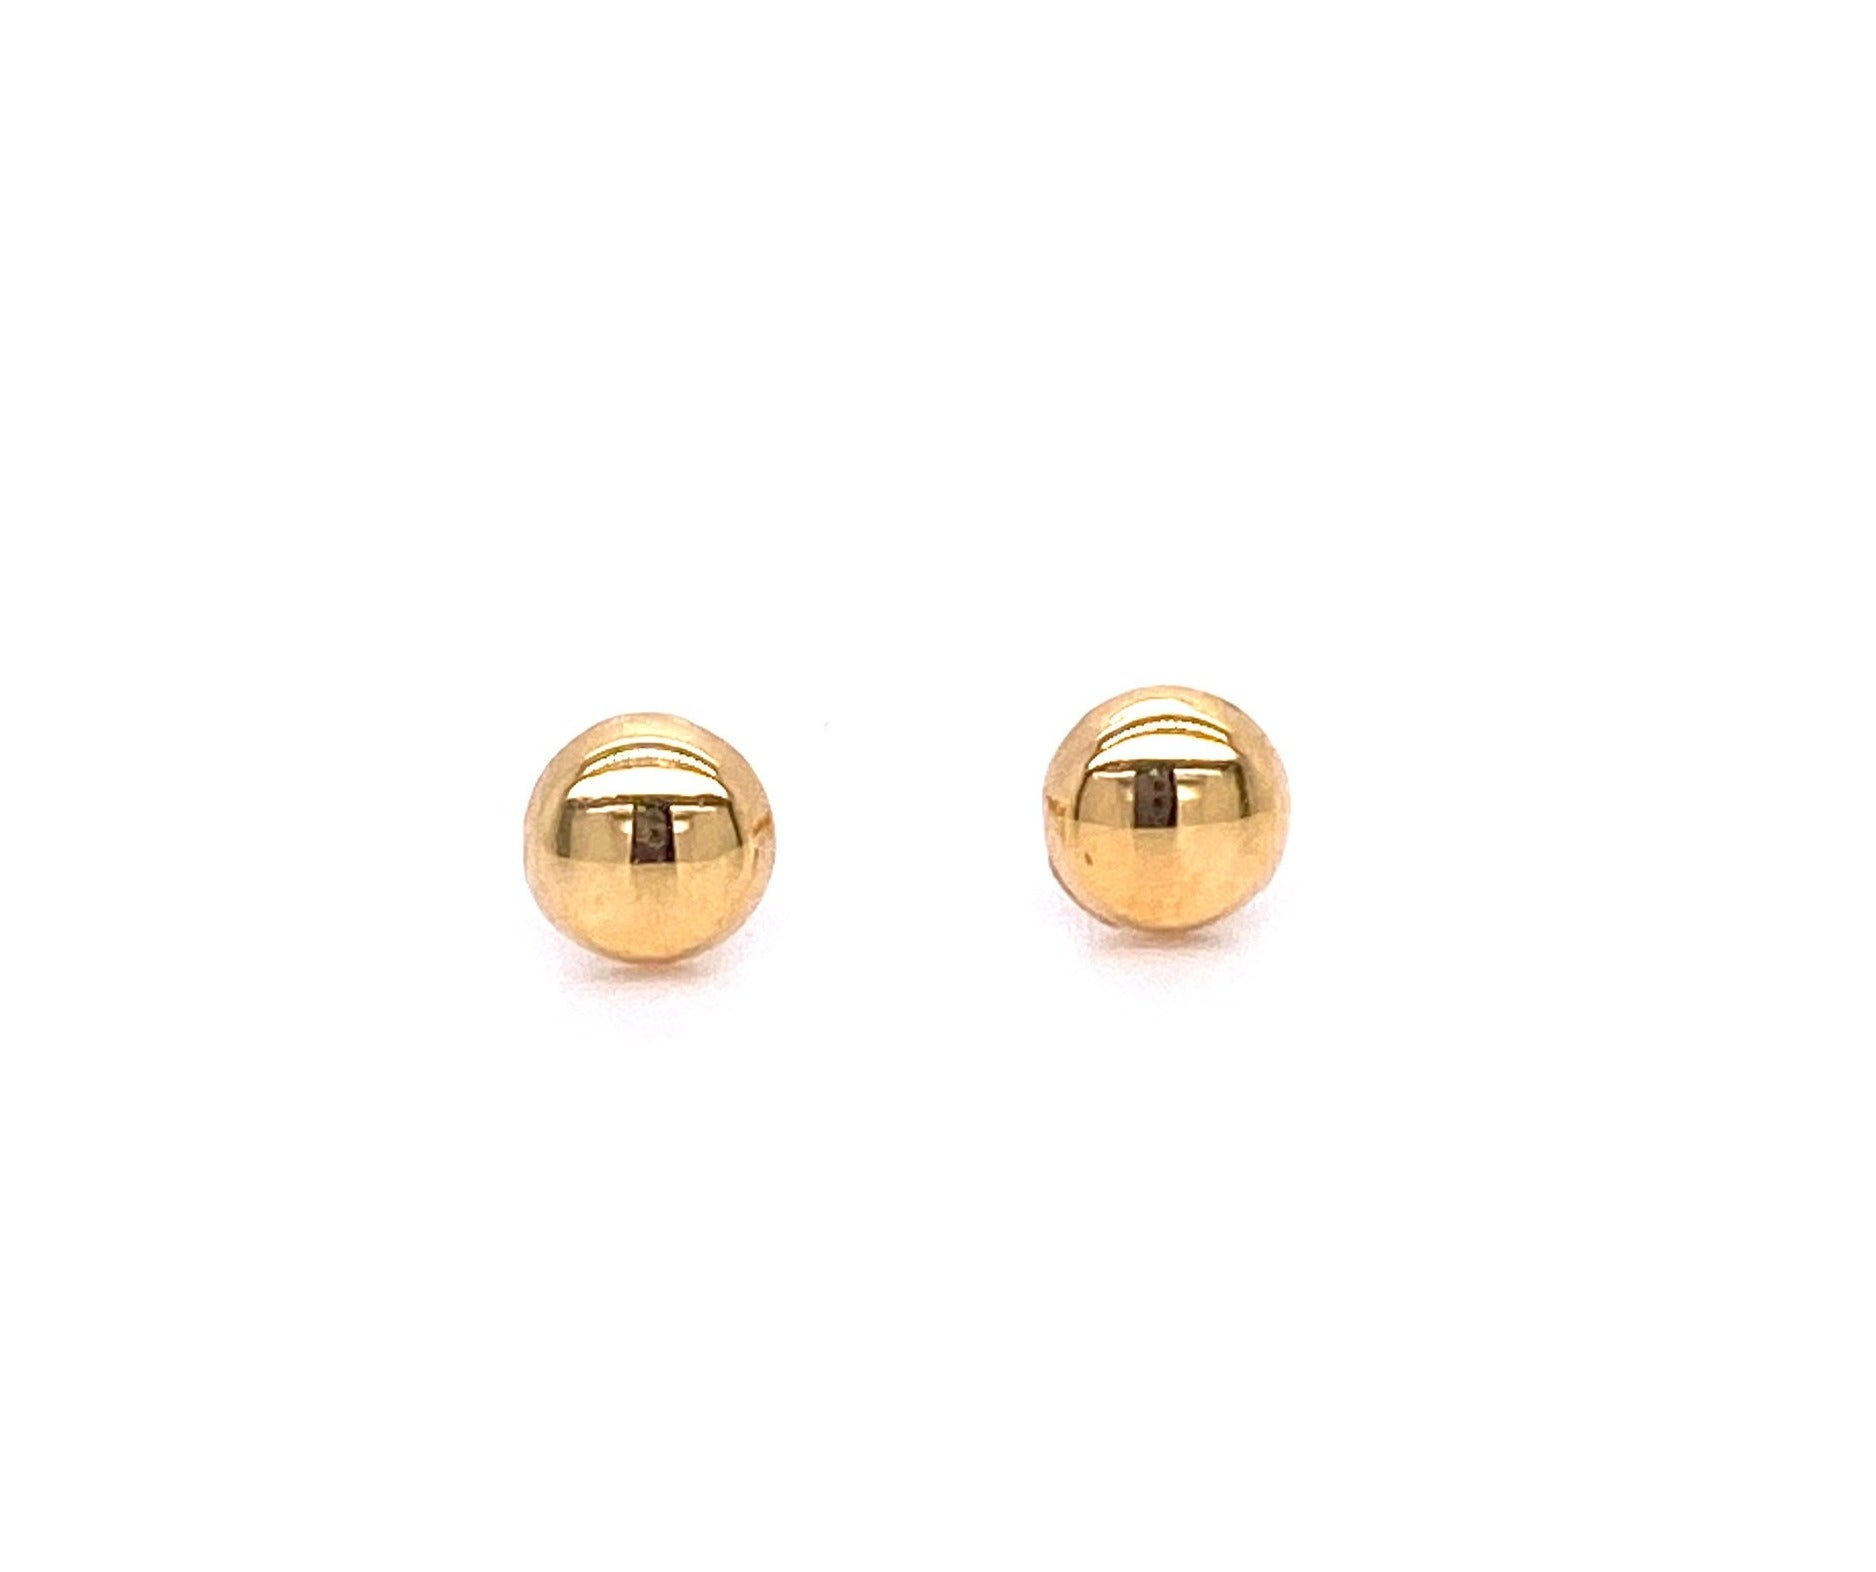 Crafted from 18k yellow gold, these beautiful baby earrings come with secure screw backs in size 4mm (3 mm and 5mm available), providing a comfortable fit for your baby's ears.